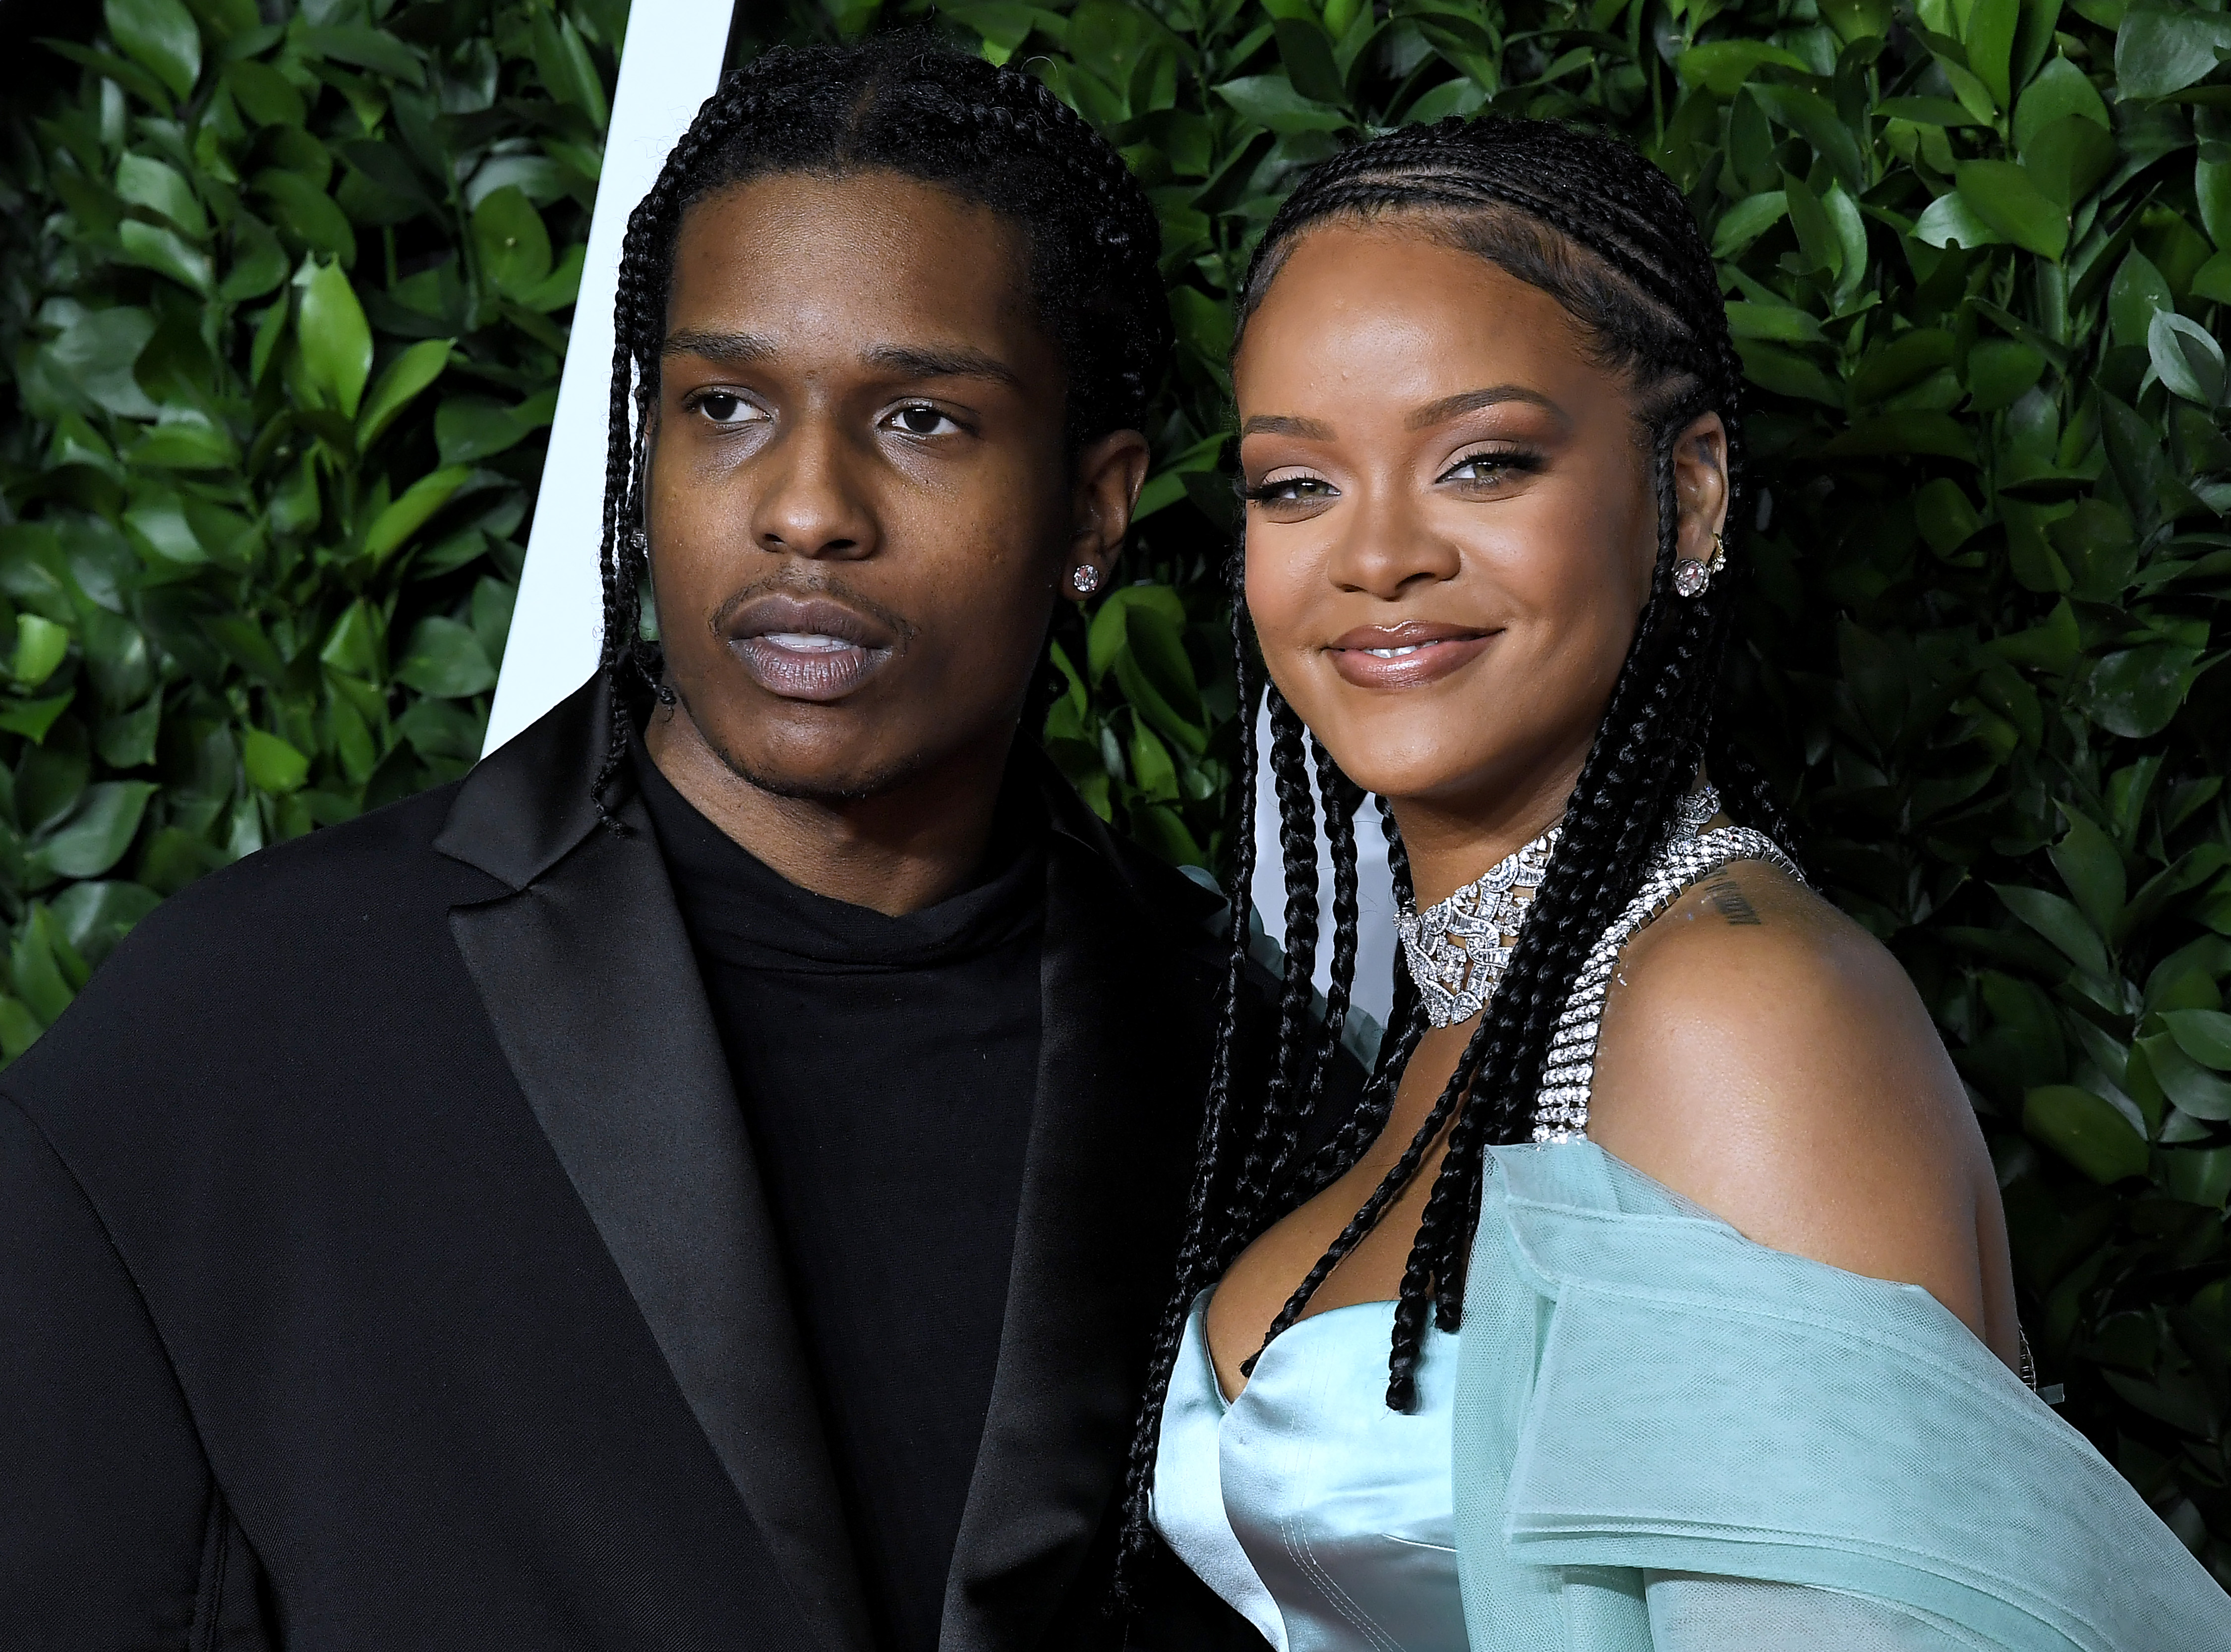 Rihanna Is Pregnant With Her First Child, Expecting with A$AP Rocky